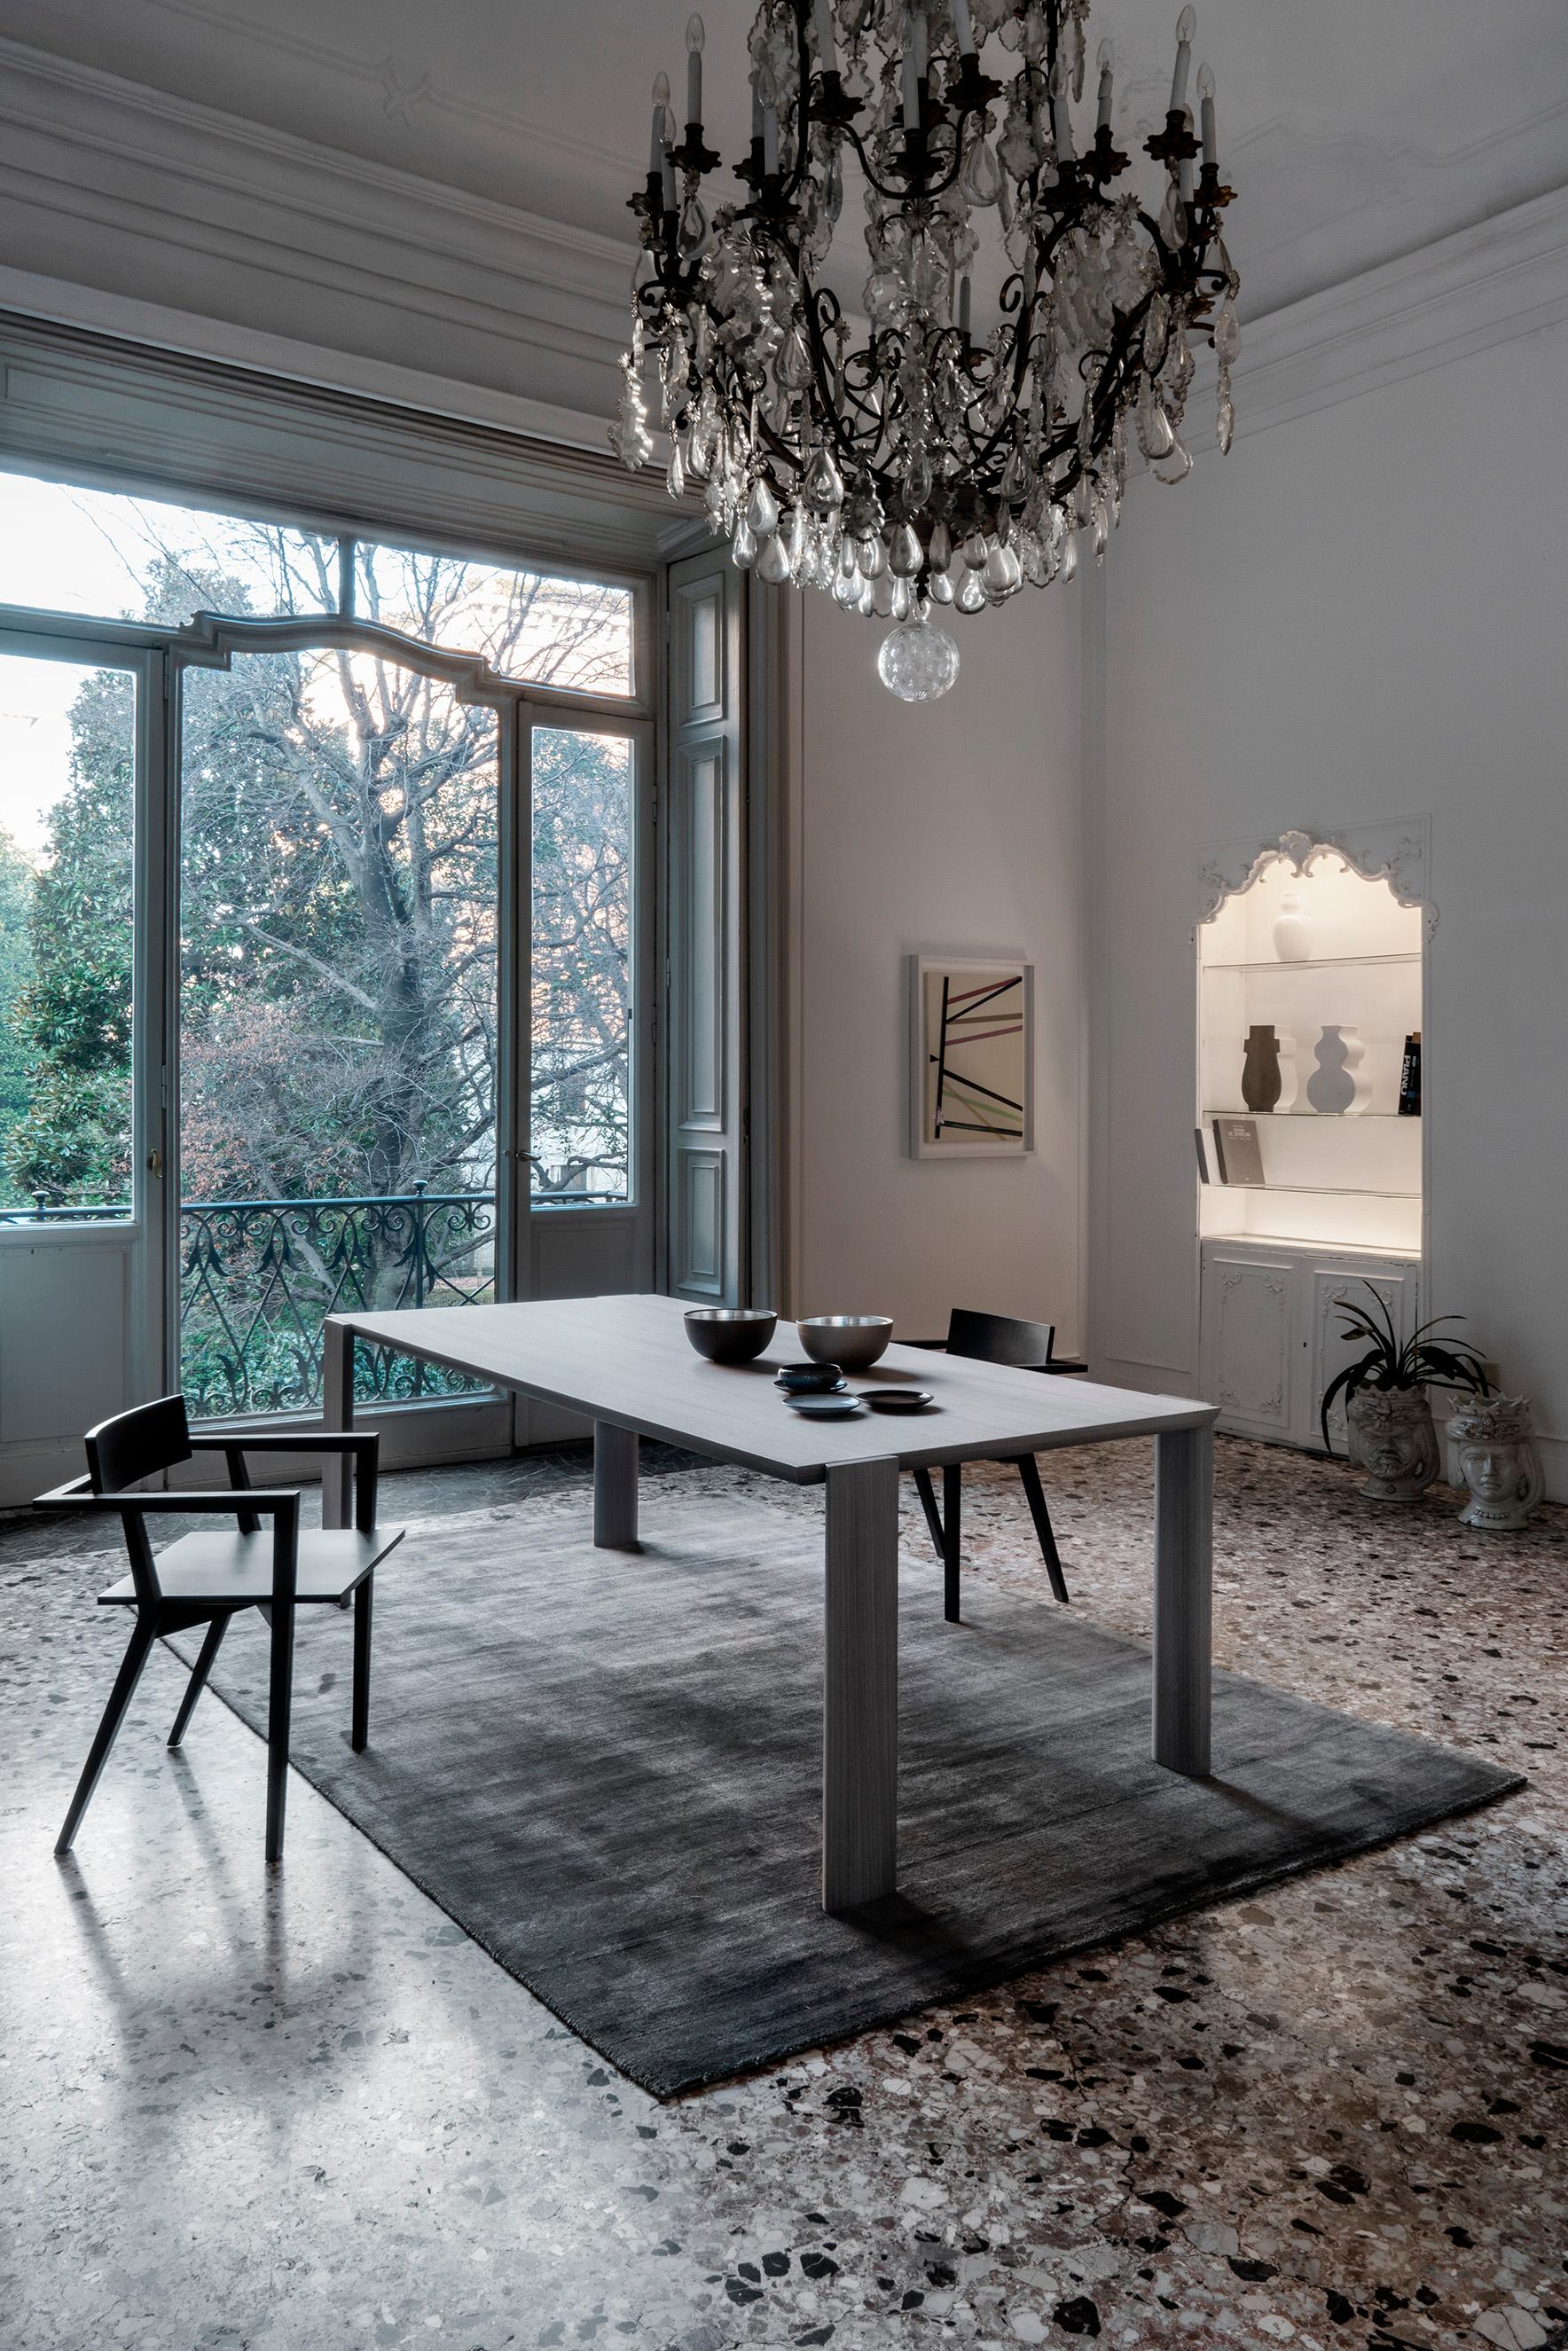 Grey spider table by Mentemano
Dimensions: W210 x D 100 x H 75 cm
Materials: Grey tay dyed

The project is based on lightness and attention to details. Volumes and lines are the result of technical and aesthetic process reaching a real